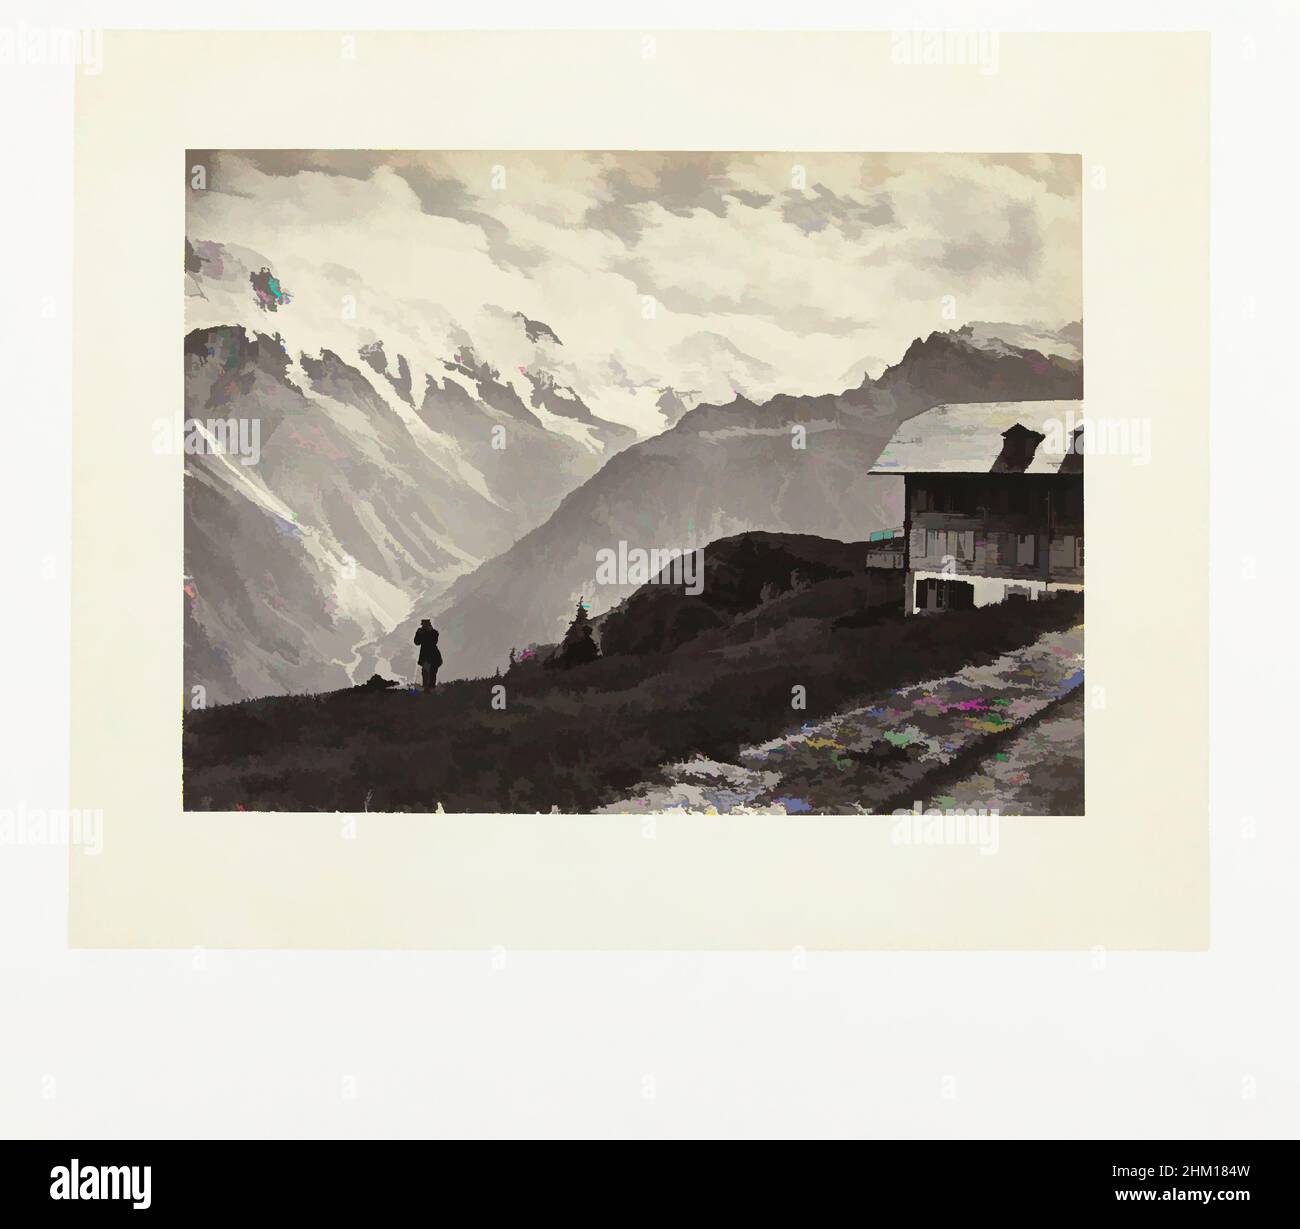 Art inspired by View of the mountain valley around Mürren, Vu de Murren, Views of Switzerland and Savoy, William England, publisher: A. Marion Son & Co., Mürren, publisher: London, 1863 - 1865, paper, cardboard, albumen print, height 156 mm × width 210 mmheight 310 mm × width 400 mm, Classic works modernized by Artotop with a splash of modernity. Shapes, color and value, eye-catching visual impact on art. Emotions through freedom of artworks in a contemporary way. A timeless message pursuing a wildly creative new direction. Artists turning to the digital medium and creating the Artotop NFT Stock Photo